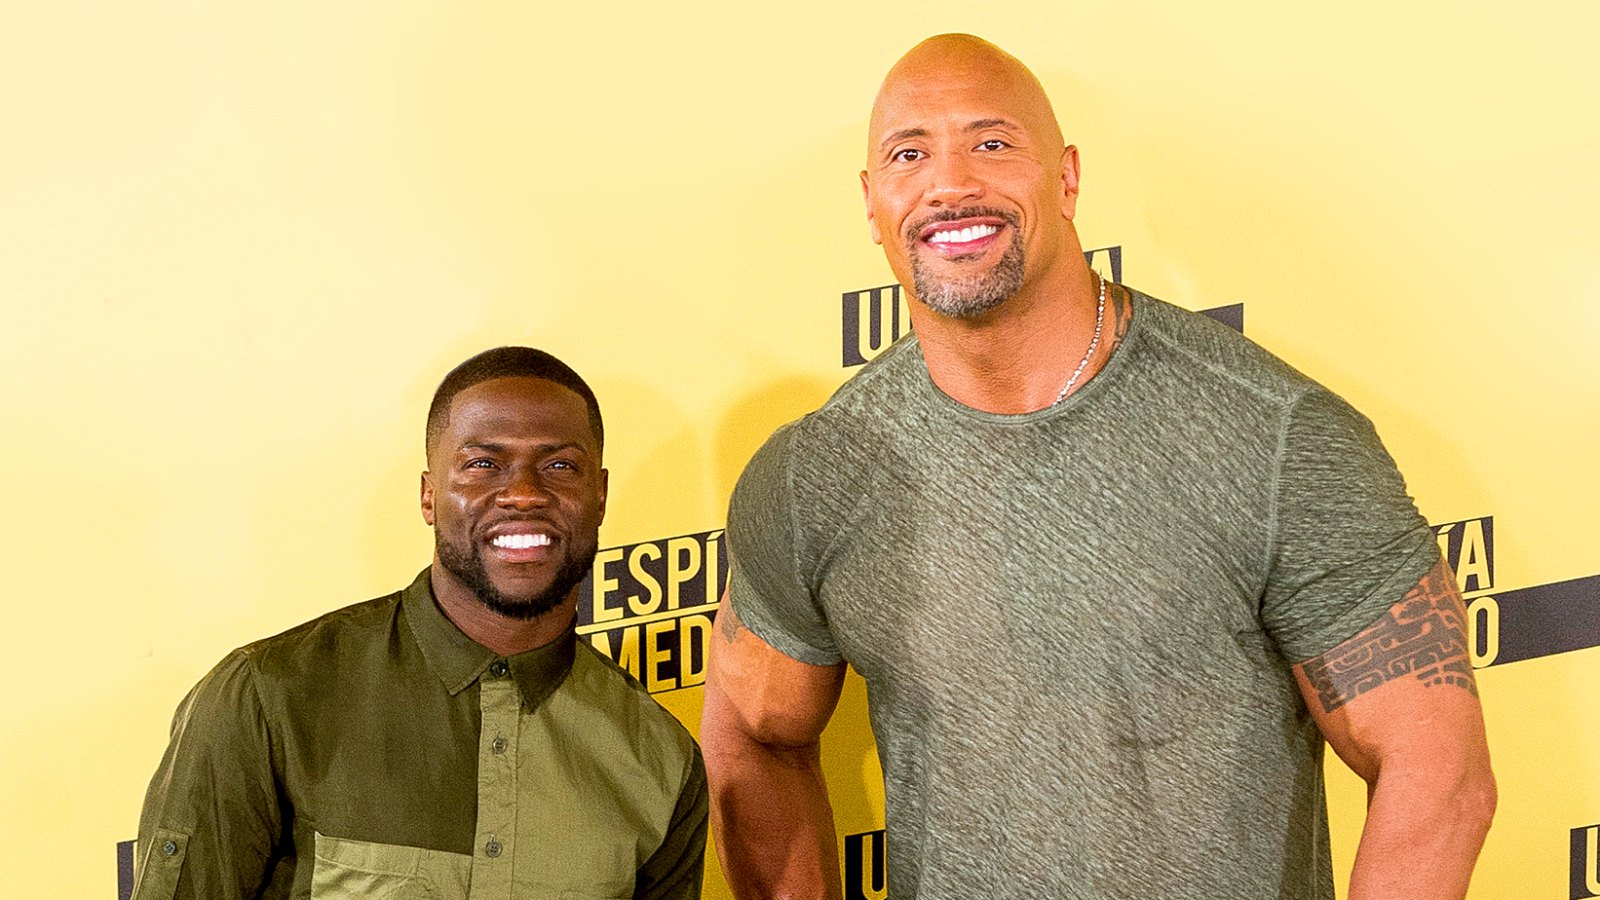 Kevin Hart and Dwayne ‘The Rock‘ Johnson attend 2016 Central Intelligence photocall at Villamagna Hotel in Madrid, Spain.